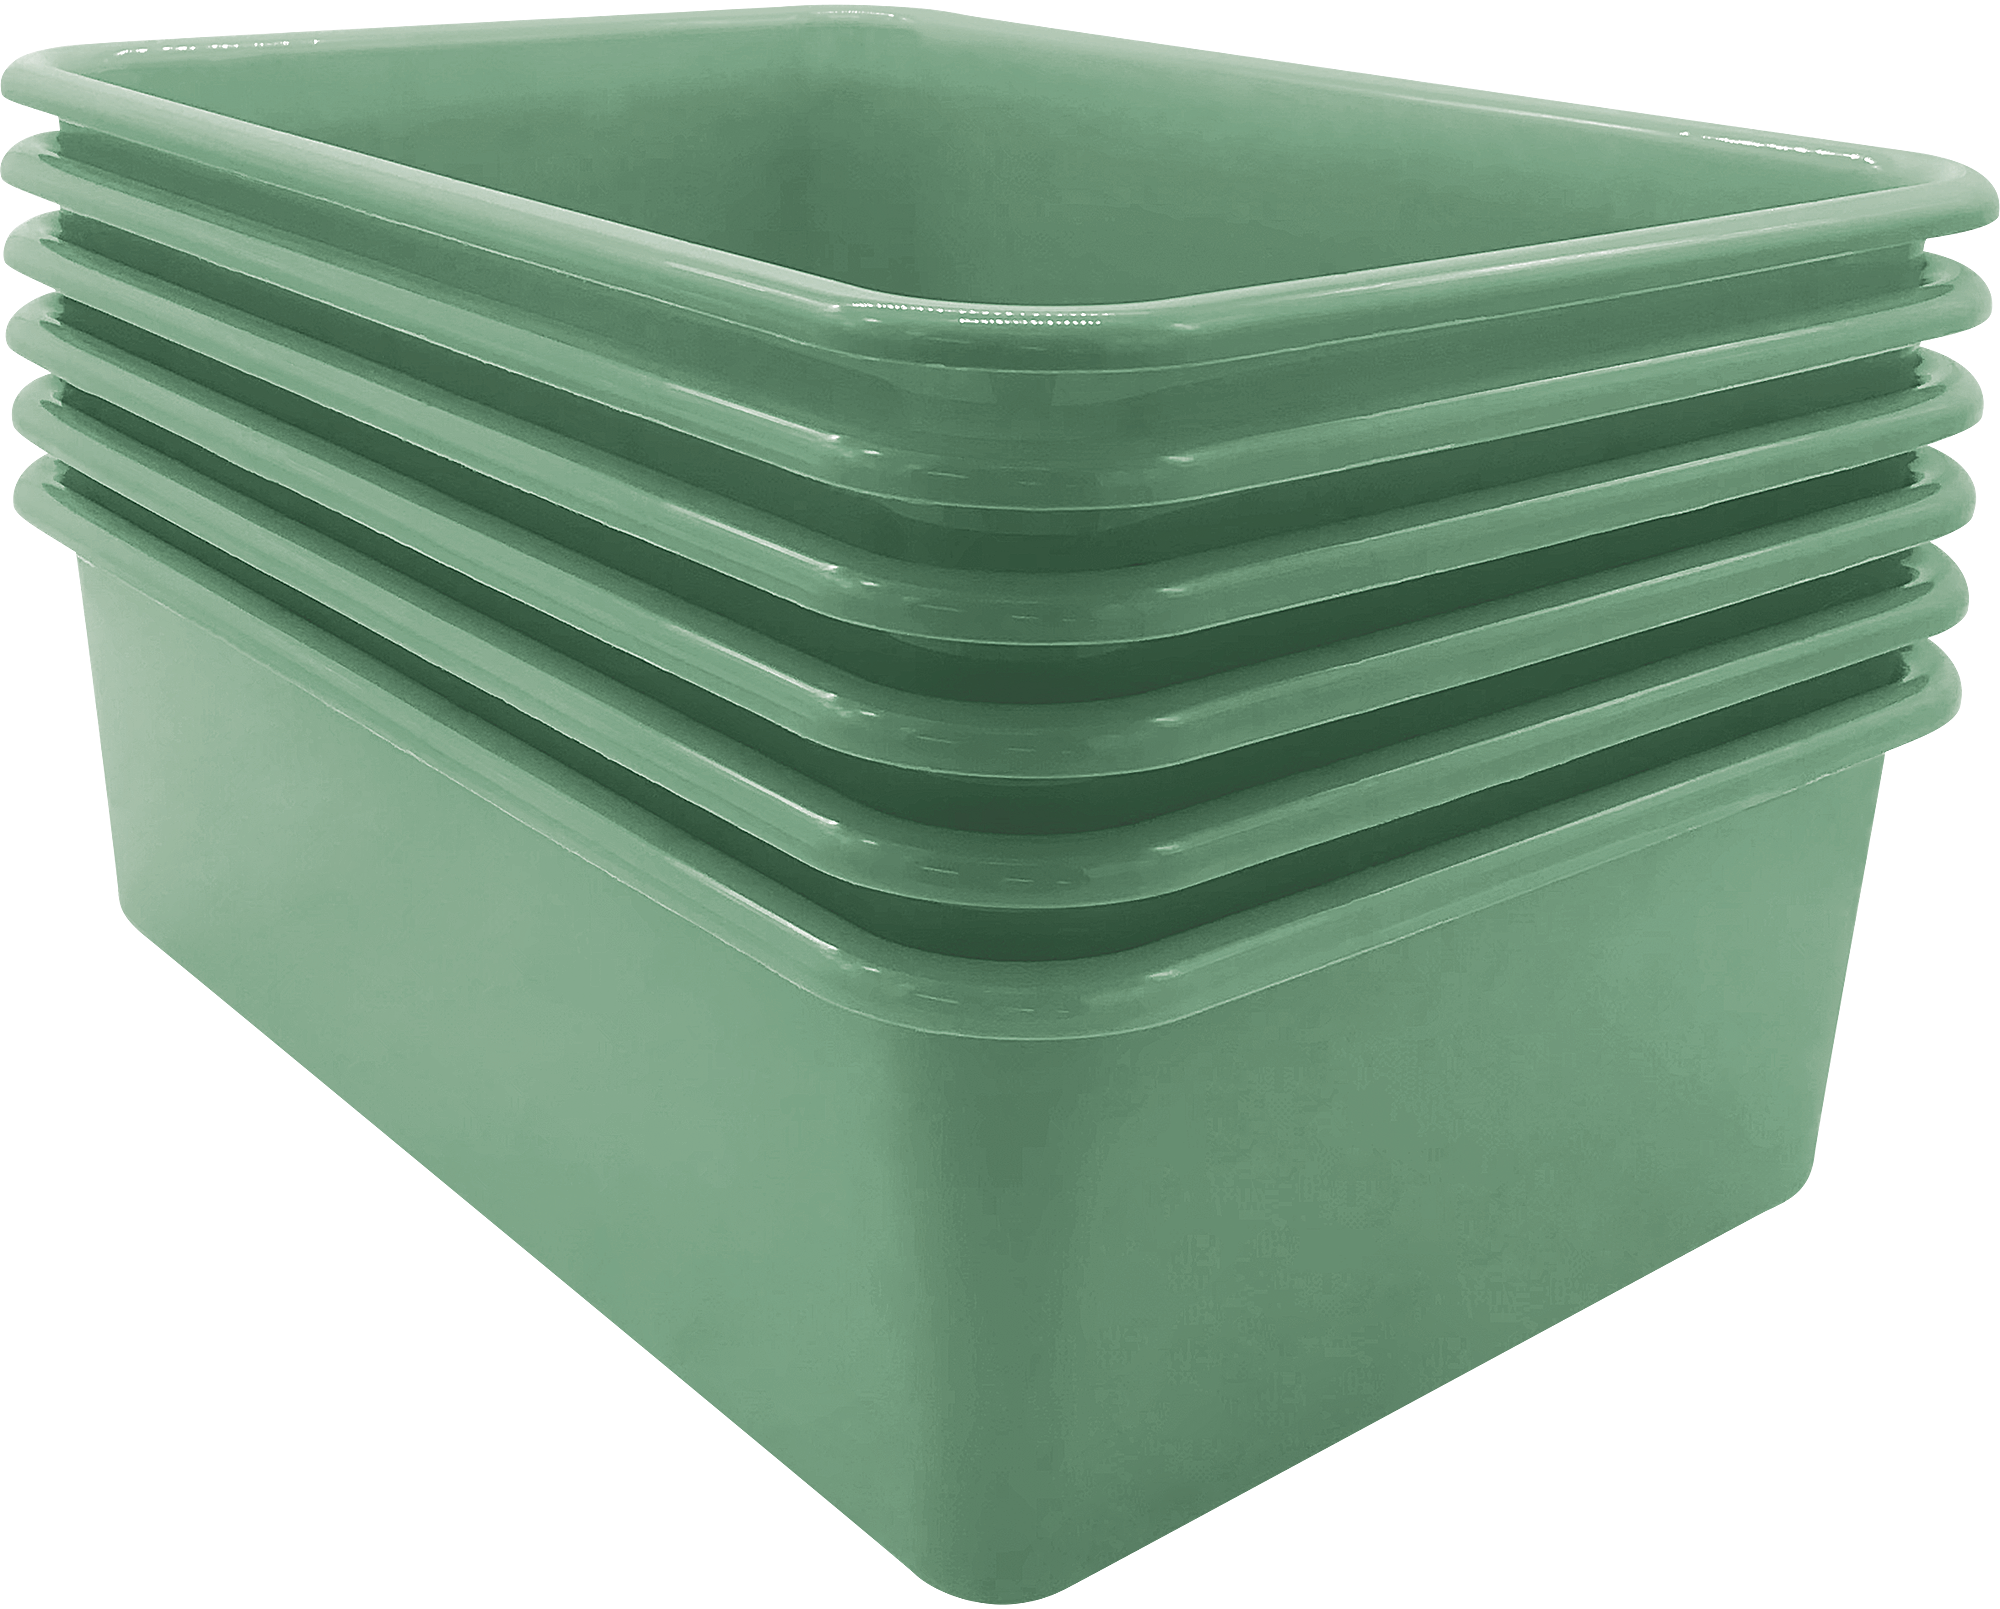 Bold Colors Large Plastic Storage Bins Set of 6 - by TCR